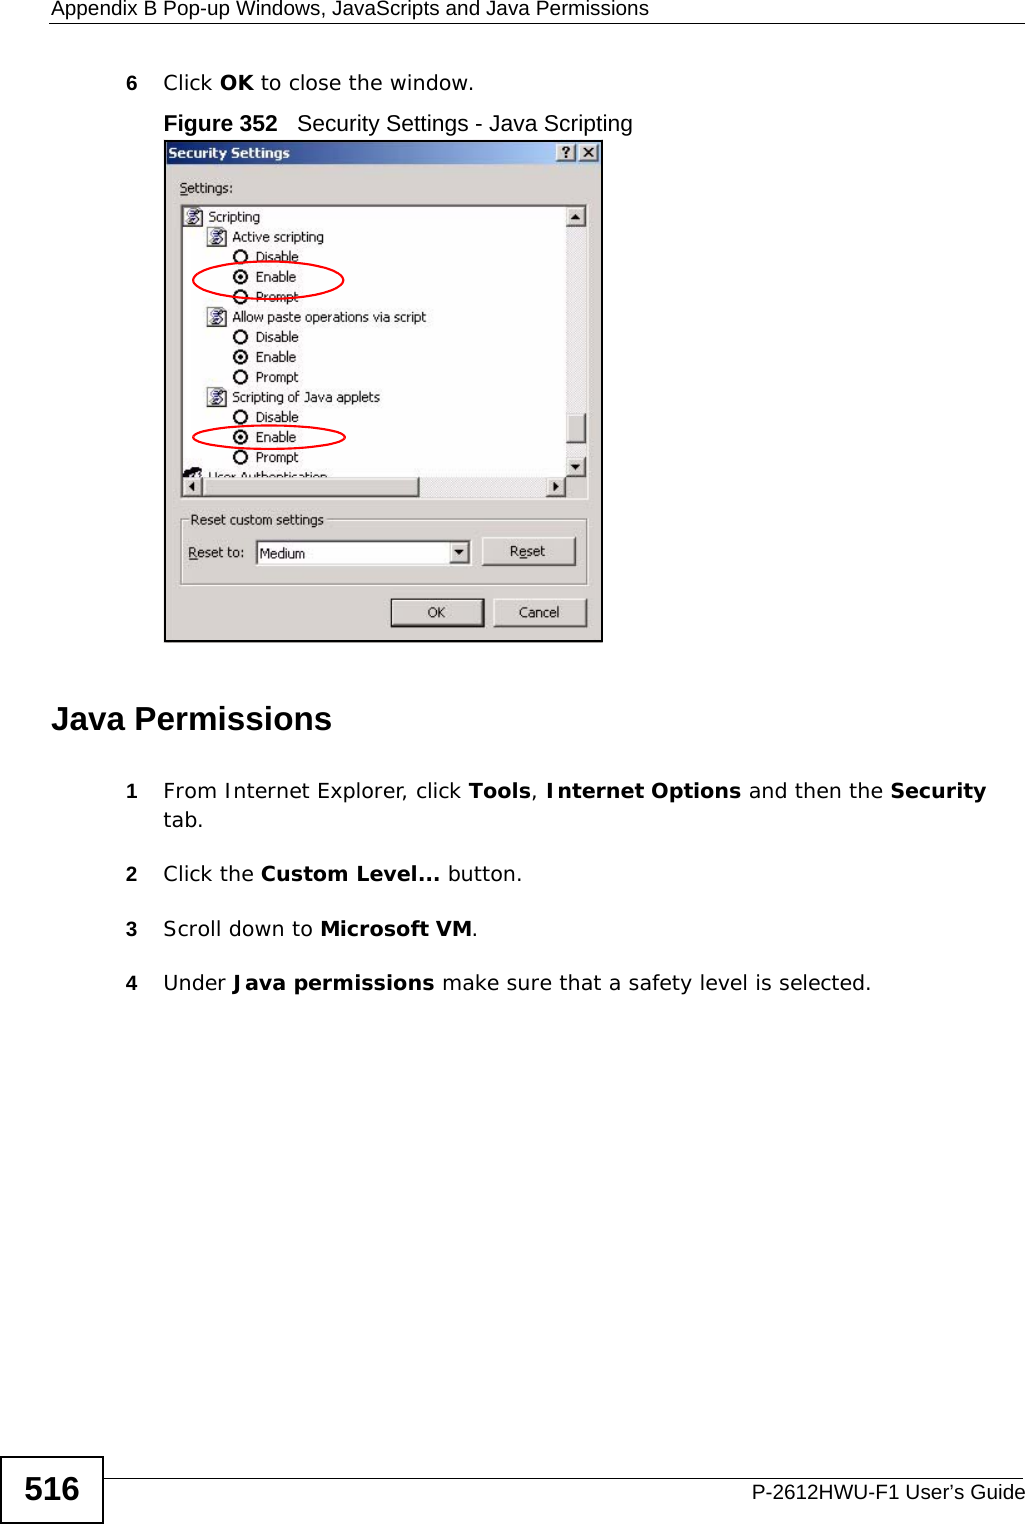 Appendix B Pop-up Windows, JavaScripts and Java PermissionsP-2612HWU-F1 User’s Guide5166Click OK to close the window.Figure 352   Security Settings - Java ScriptingJava Permissions1From Internet Explorer, click Tools, Internet Options and then the Security tab. 2Click the Custom Level... button. 3Scroll down to Microsoft VM. 4Under Java permissions make sure that a safety level is selected.